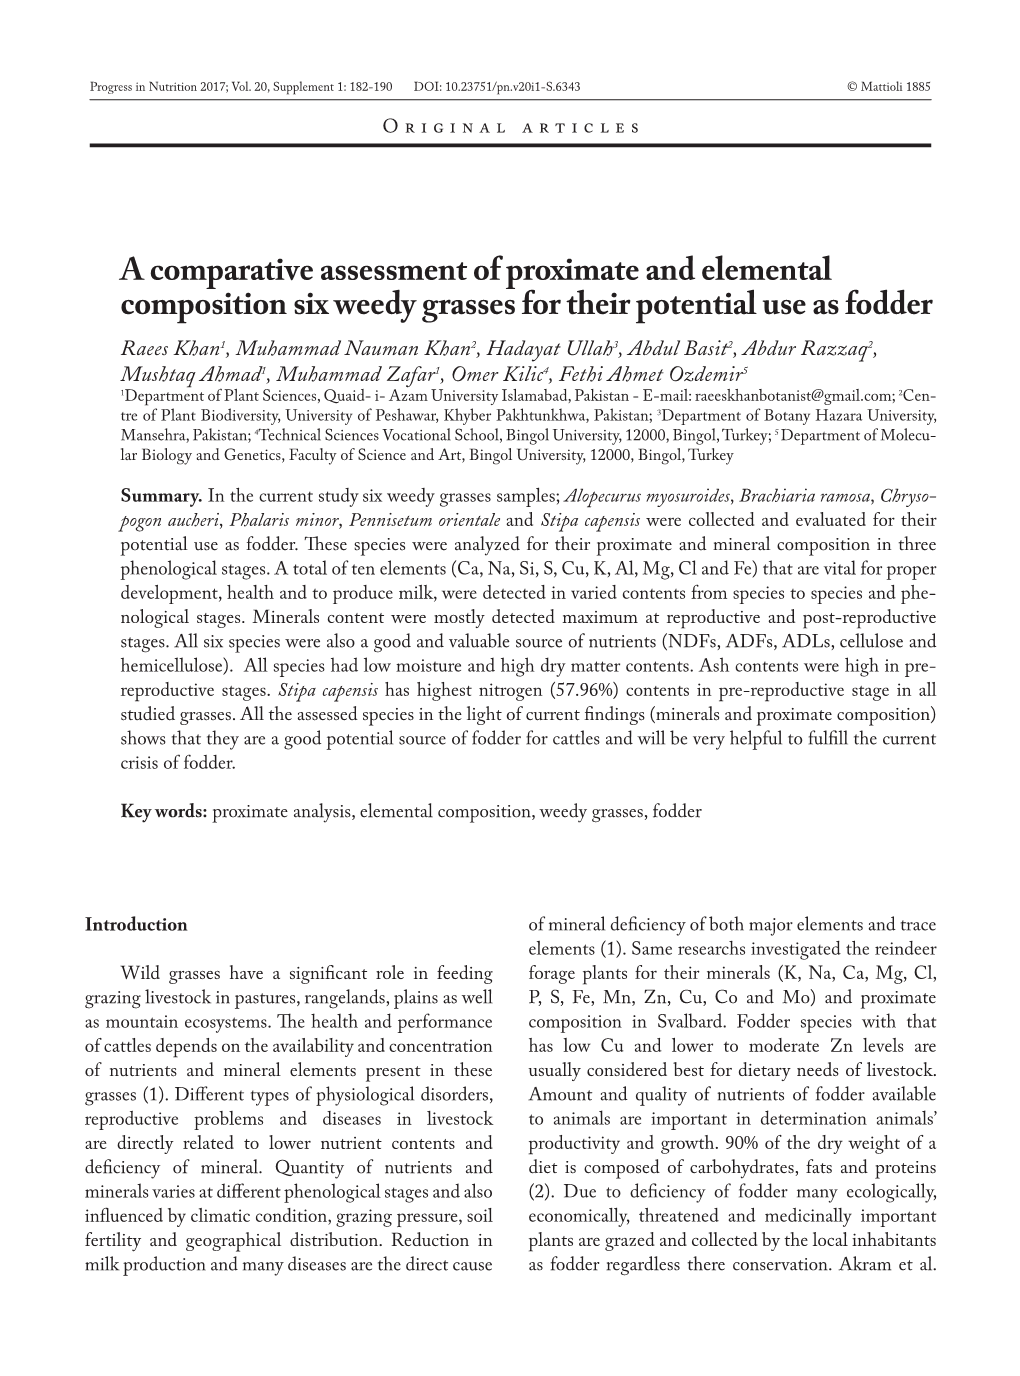 A Comparative Assessment of Proximate and Elemental